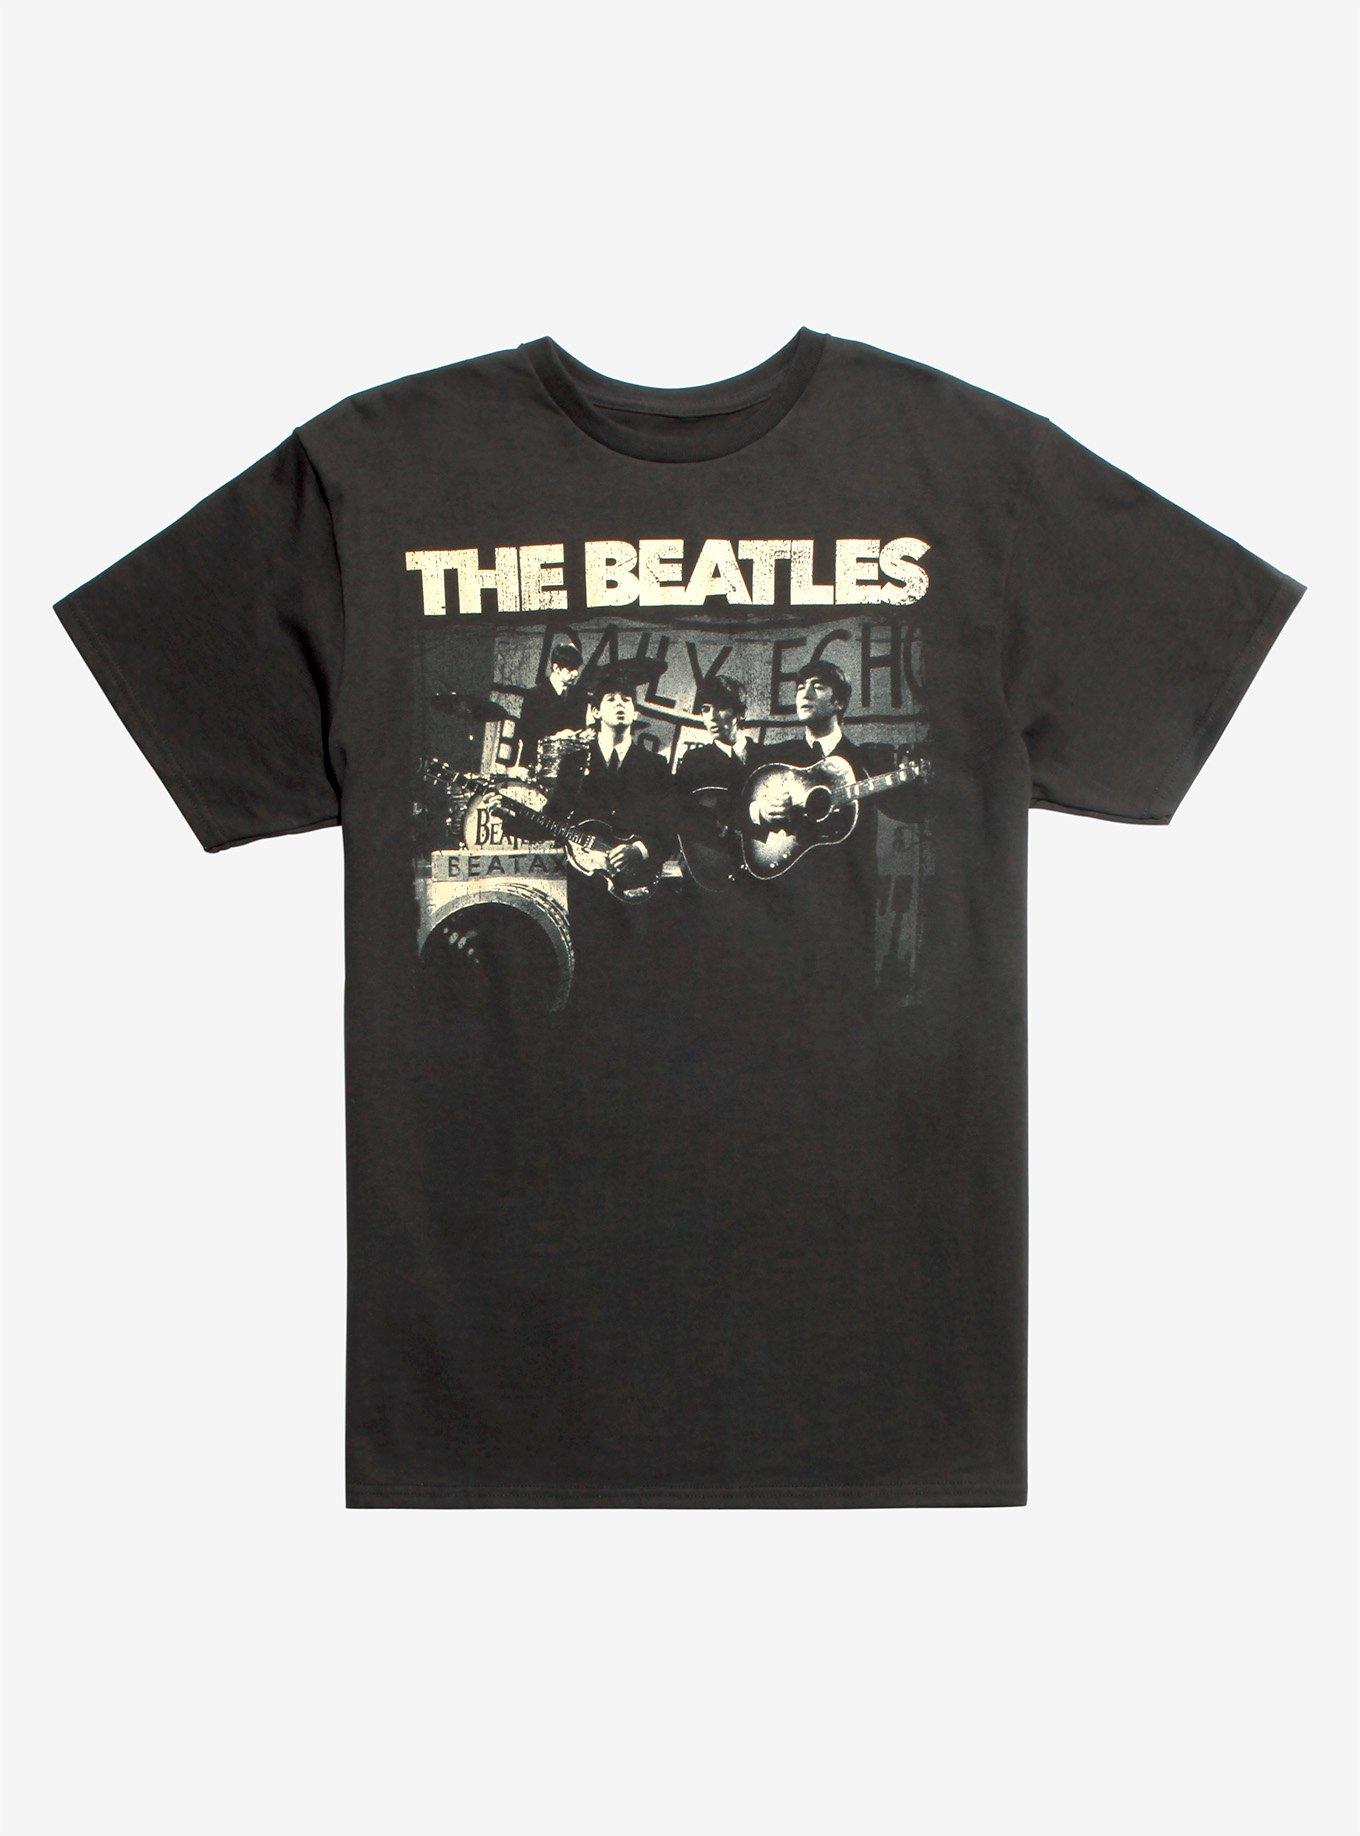 The Beatles 1963 Performance T-Shirt | Hot Topic